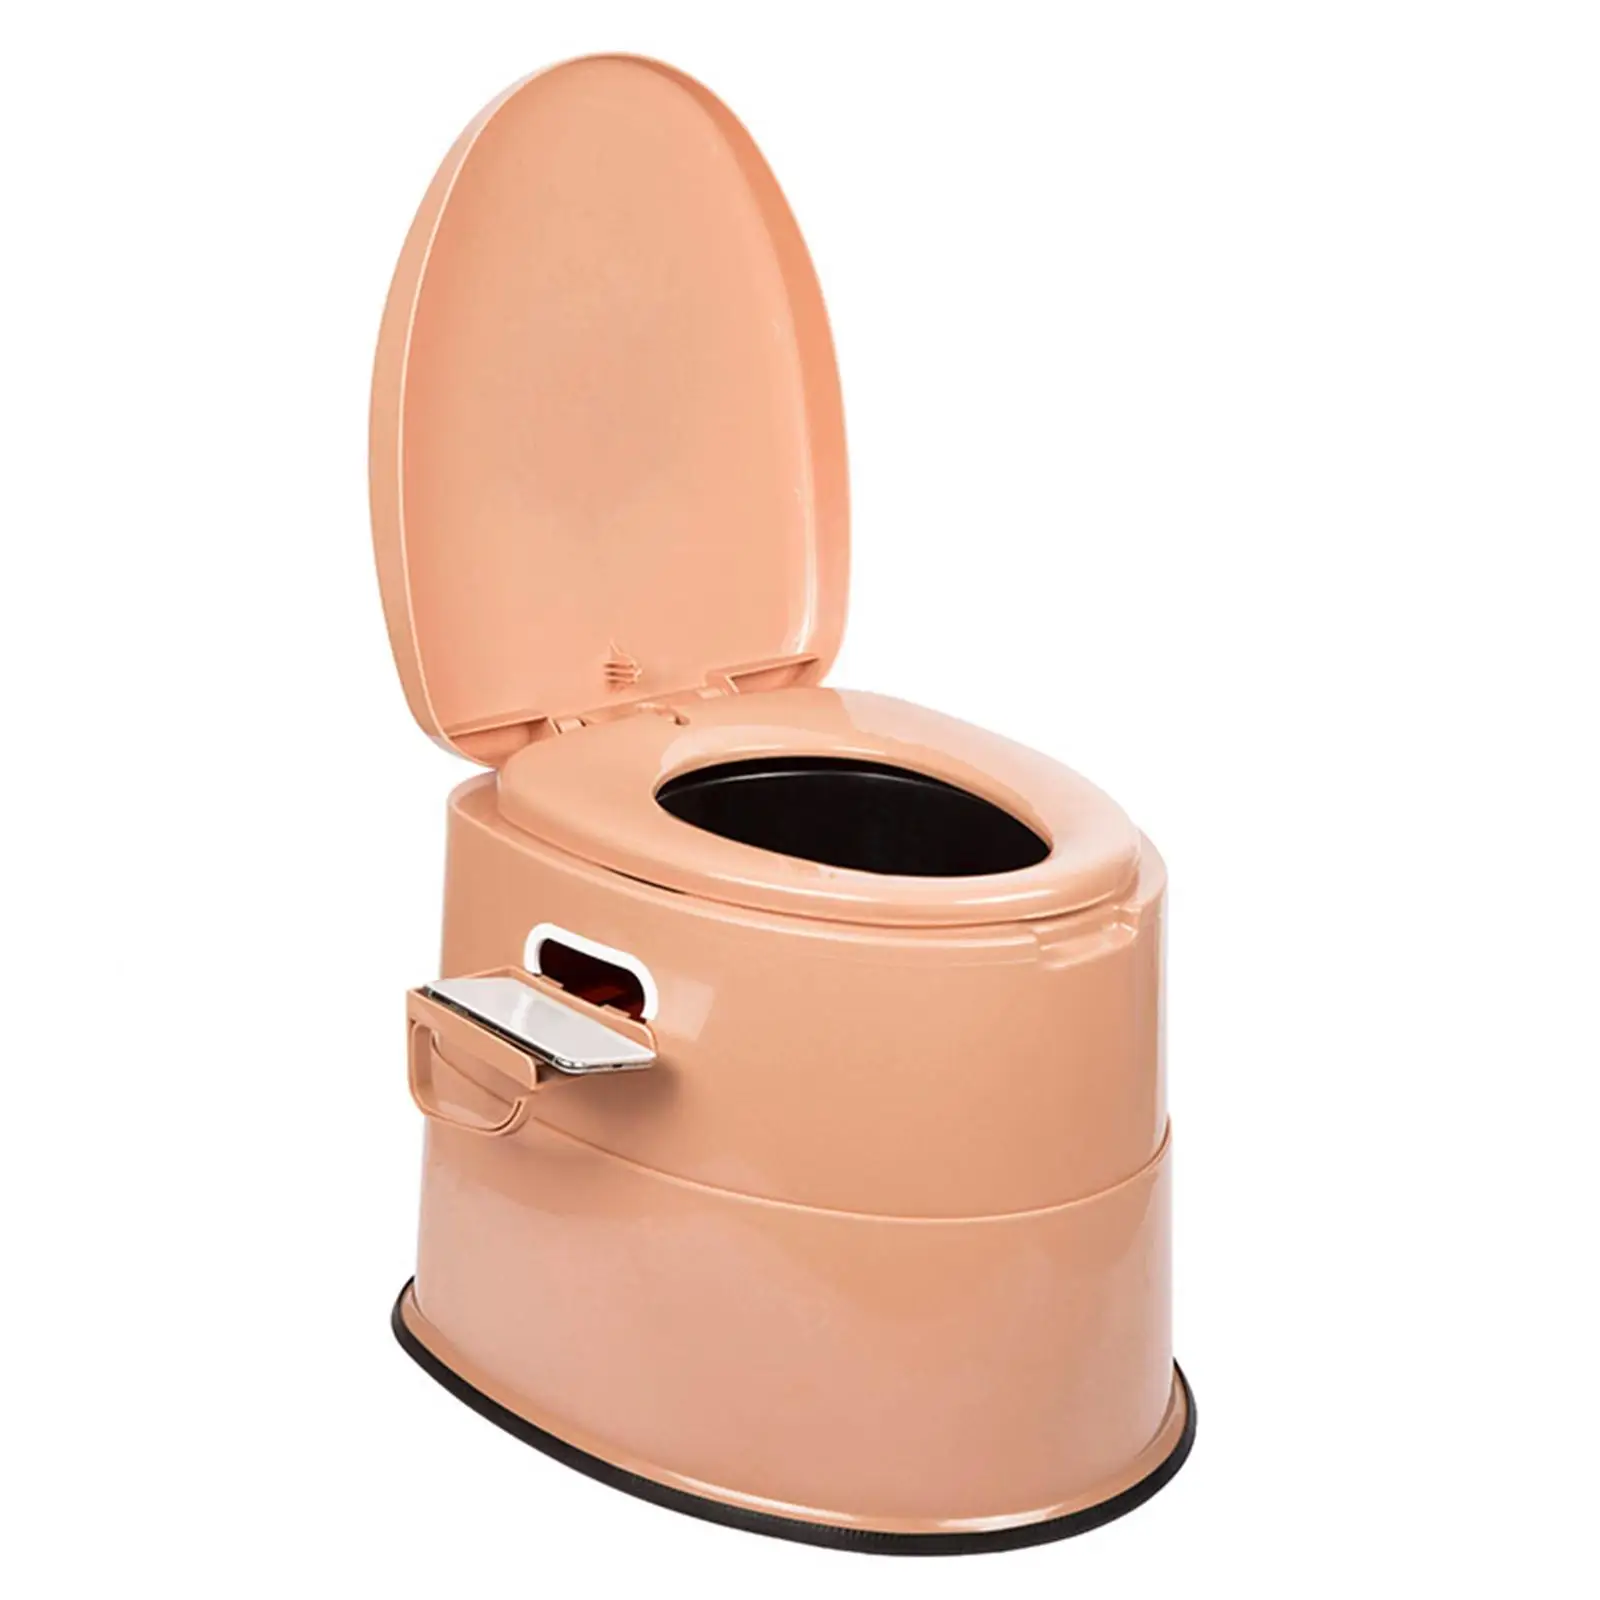 Outdoor Potty with Lid Detachable Inner Bucket Sturdy Portable Toilet for Adults for Indoor Living Room Hiking Trips